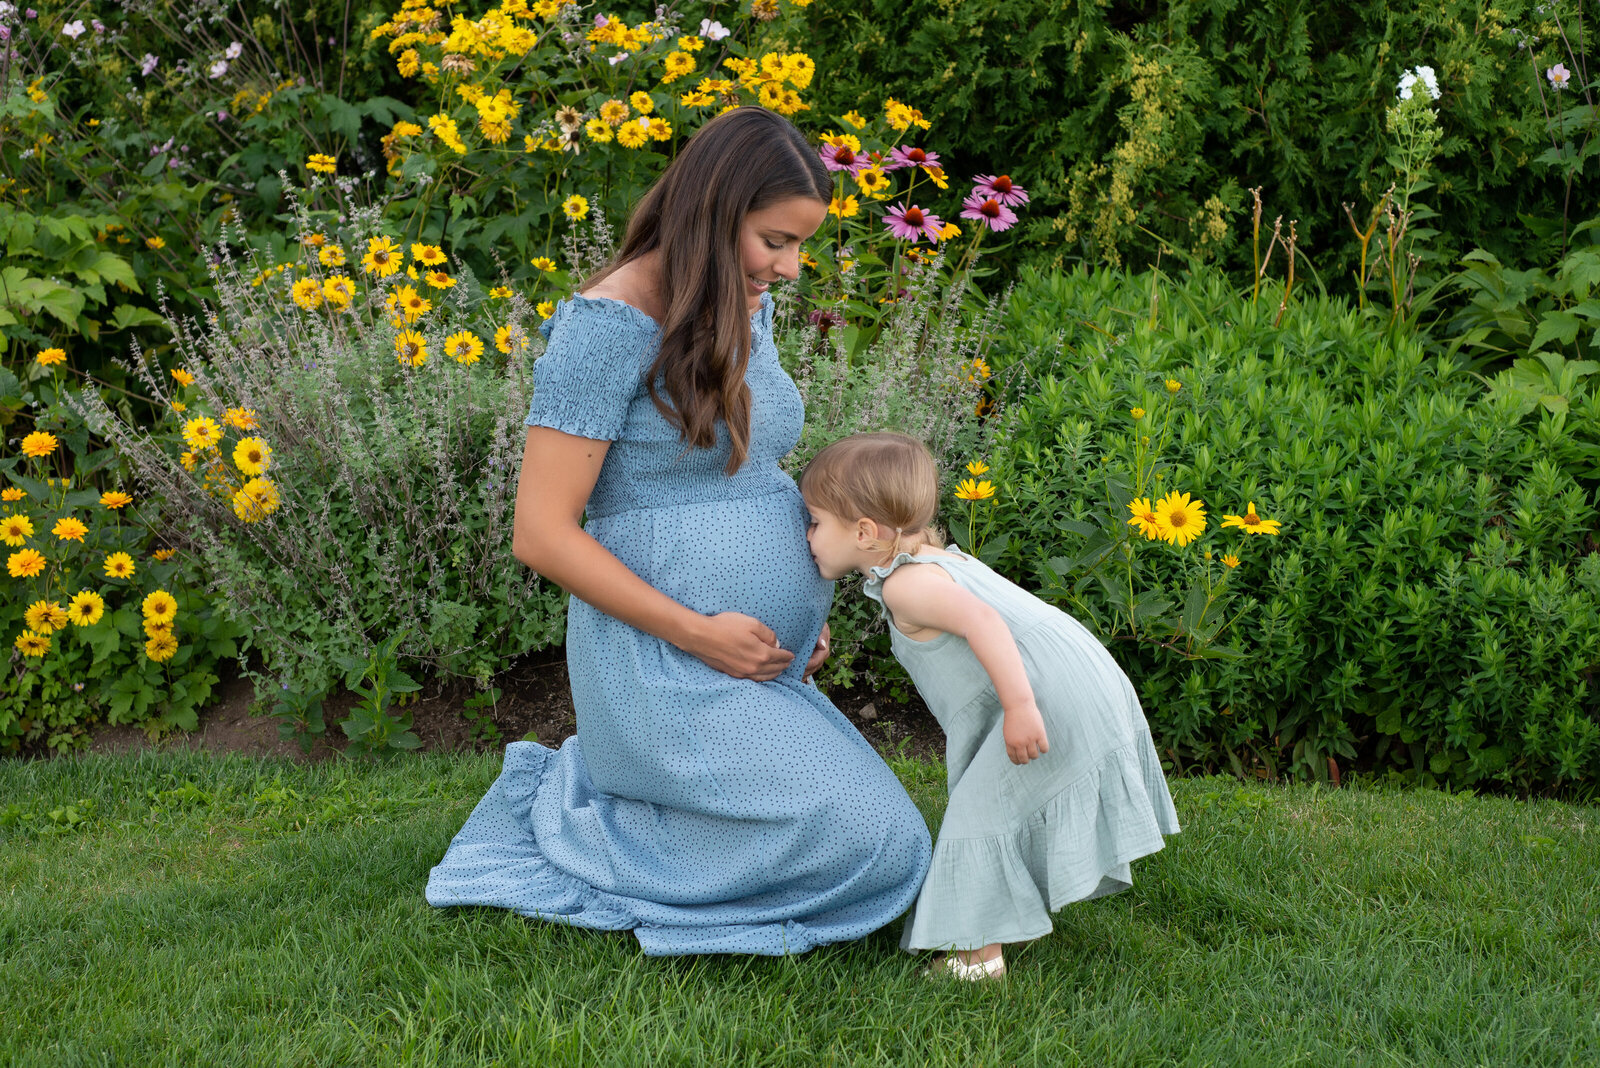 Baby kissing mothers pregnant belly in Ogunquit Maine garden